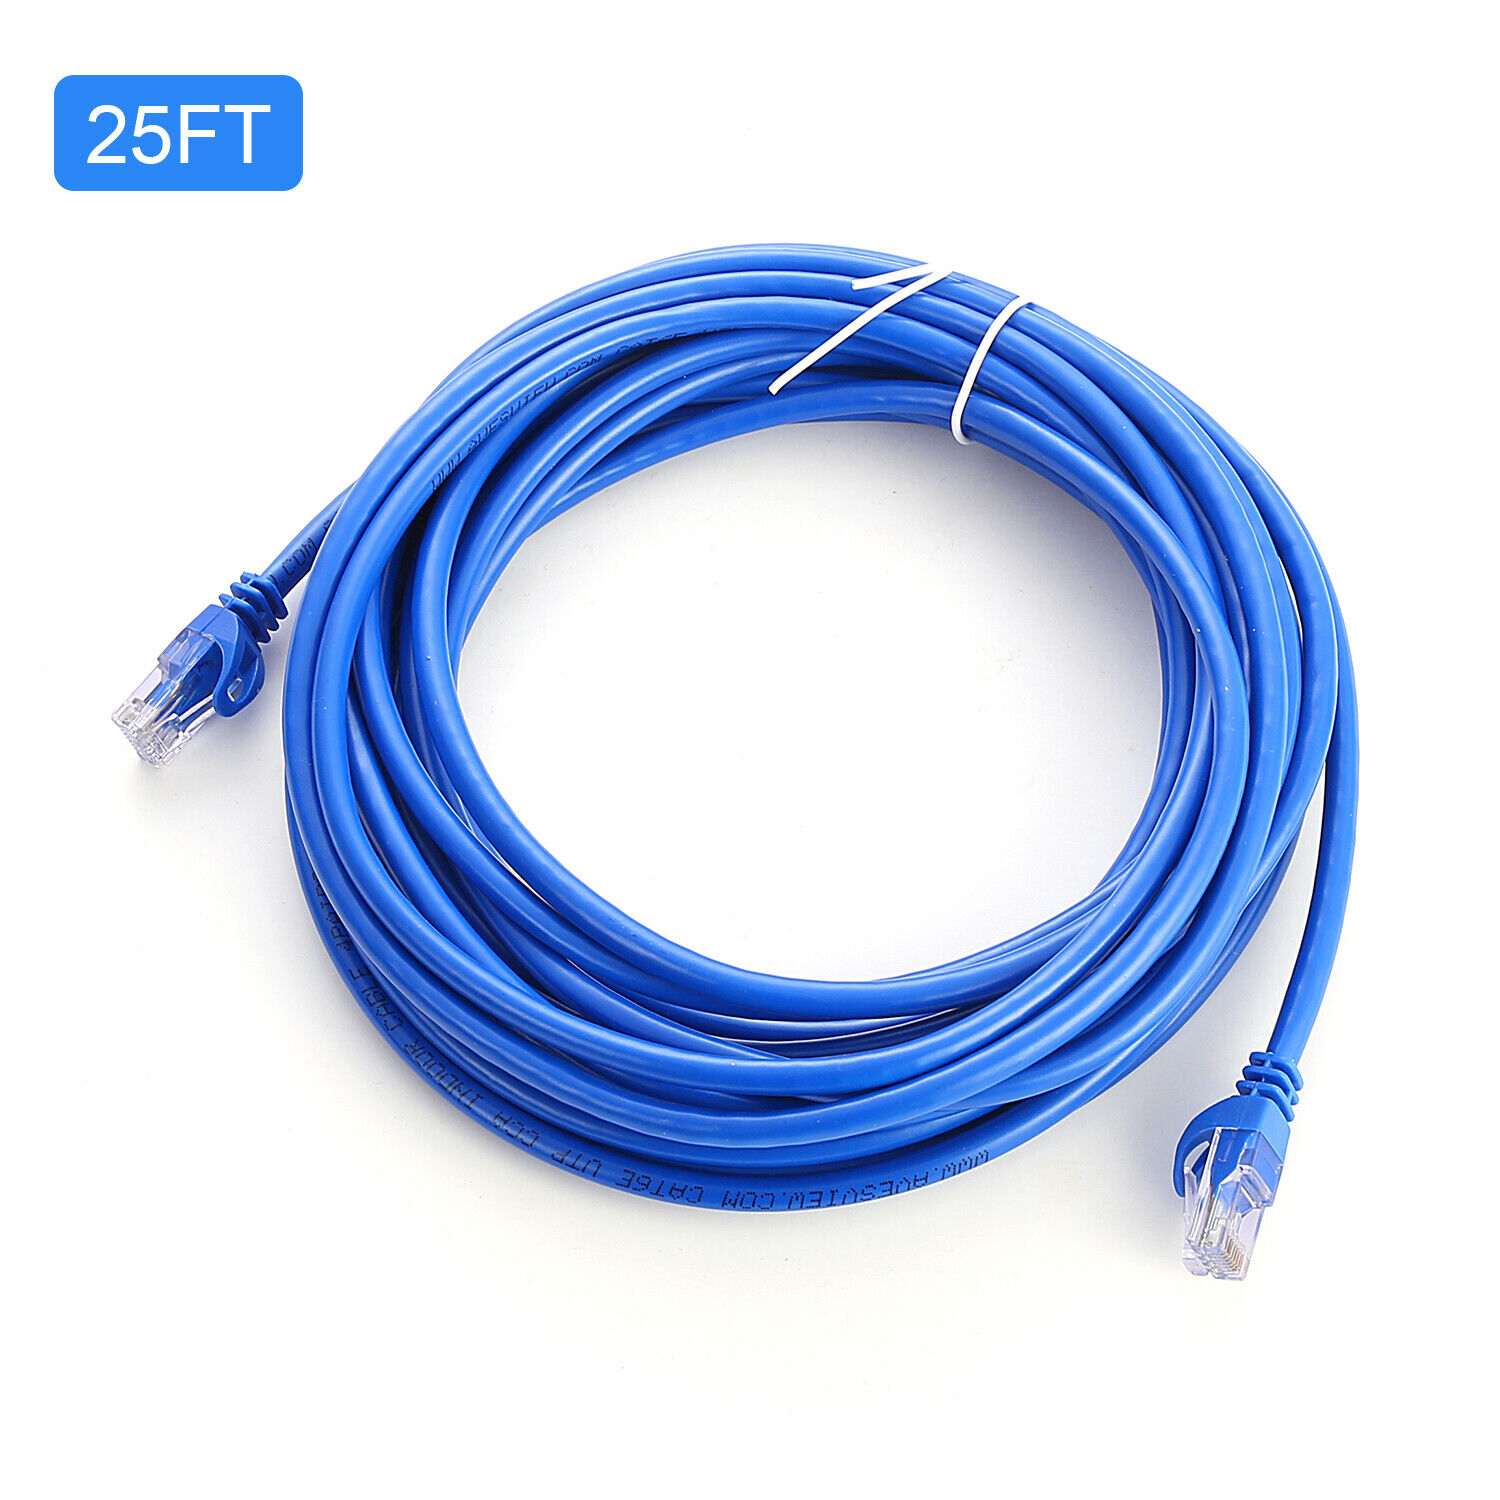 CAT6 Ethernet Cable Patch Cord High Speed Network 550Mhz  Blue 25FT 50FT 100FT